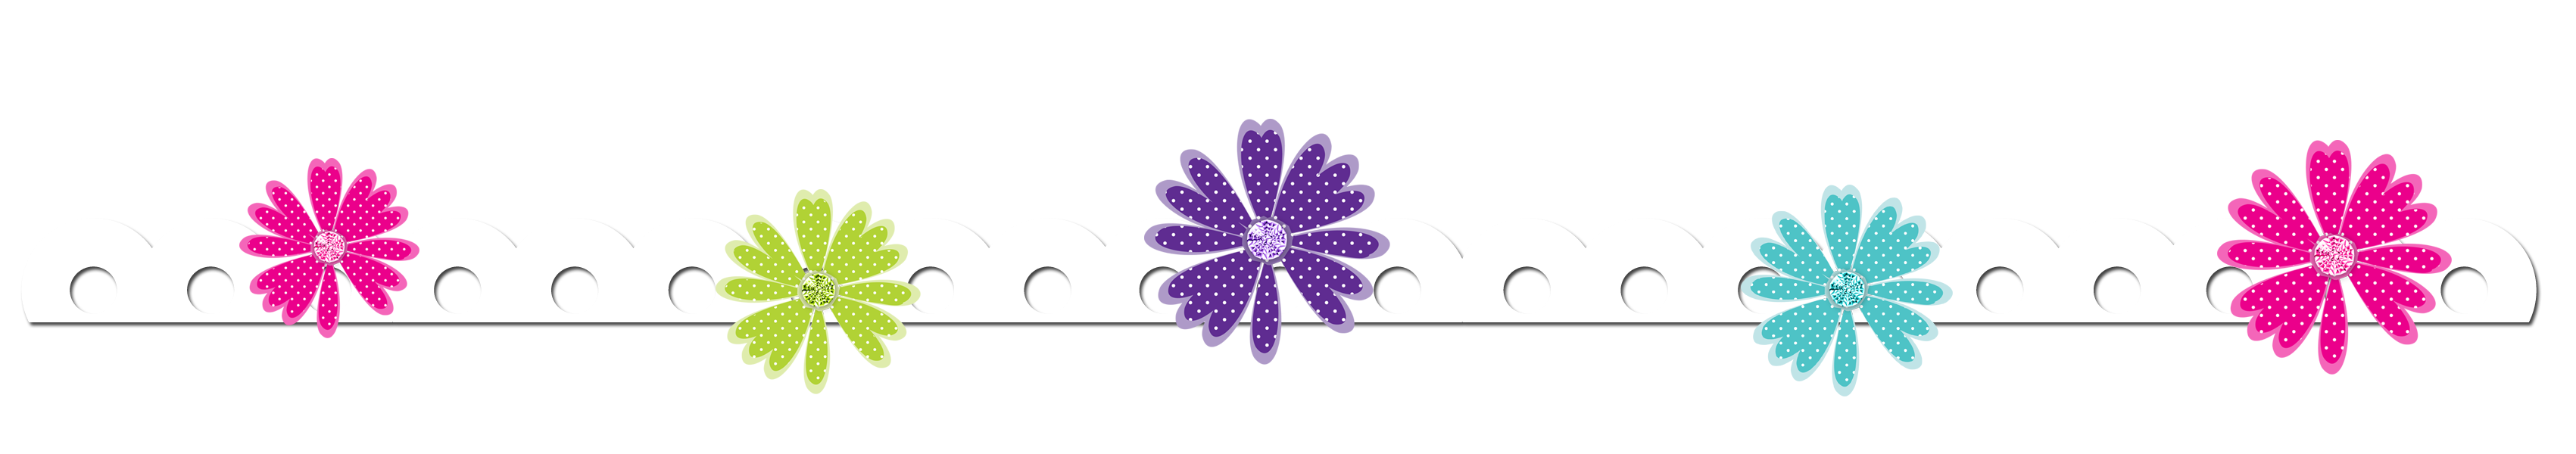 Flower-border-clip-art-free-vector-for-free-download-about-image-2